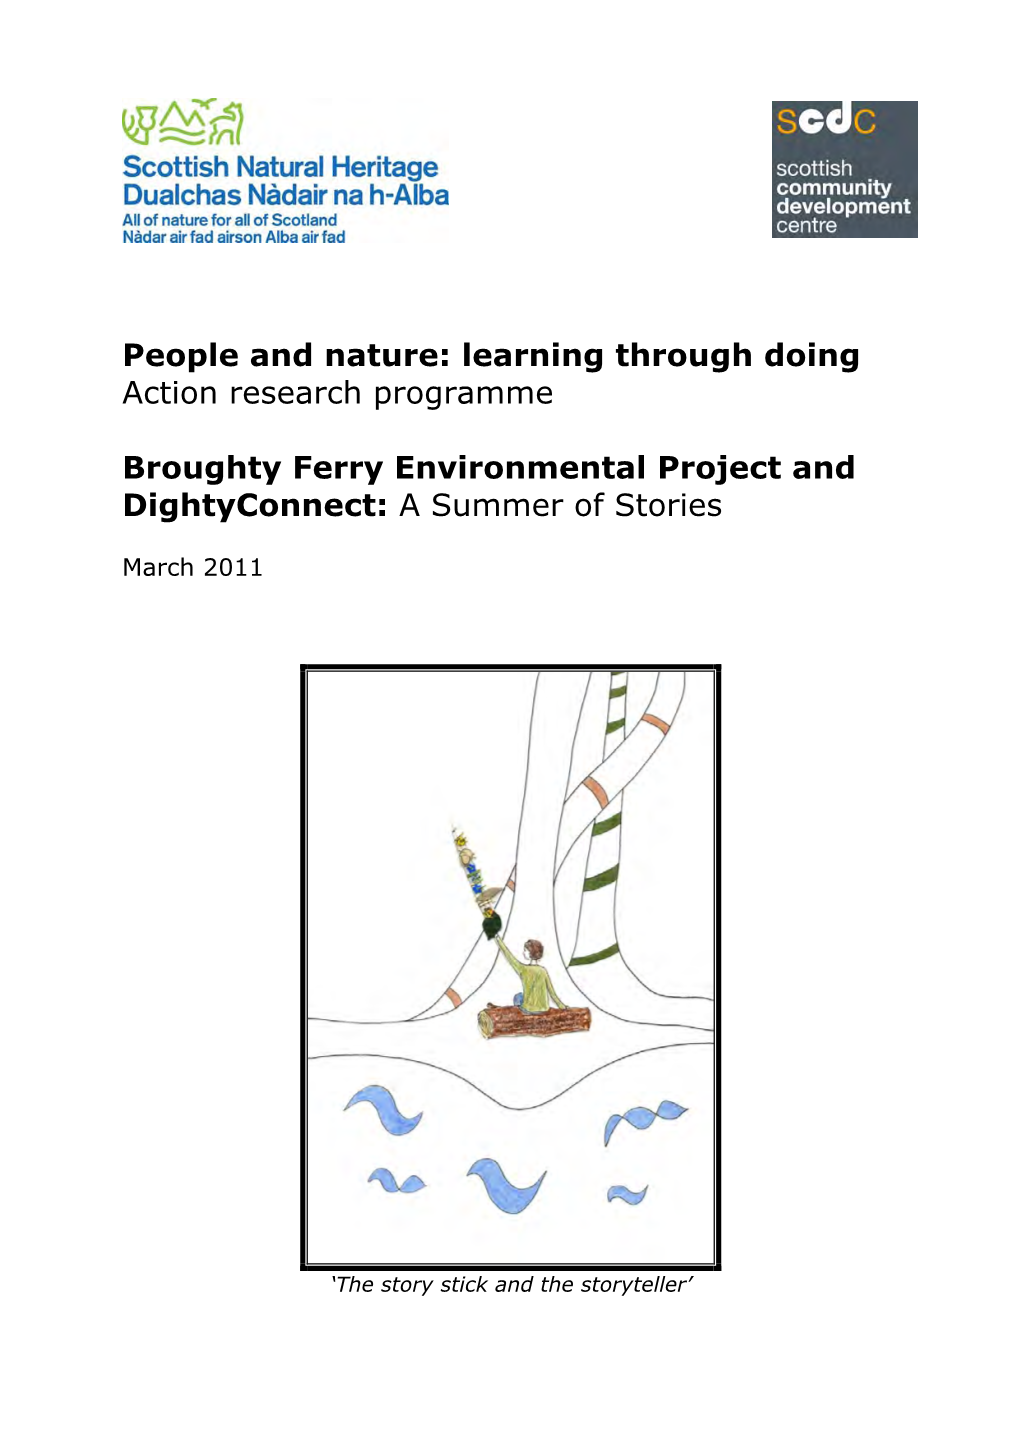 Broughty Ferry Environmental Project and Dightyconnect: a Summer of Stories